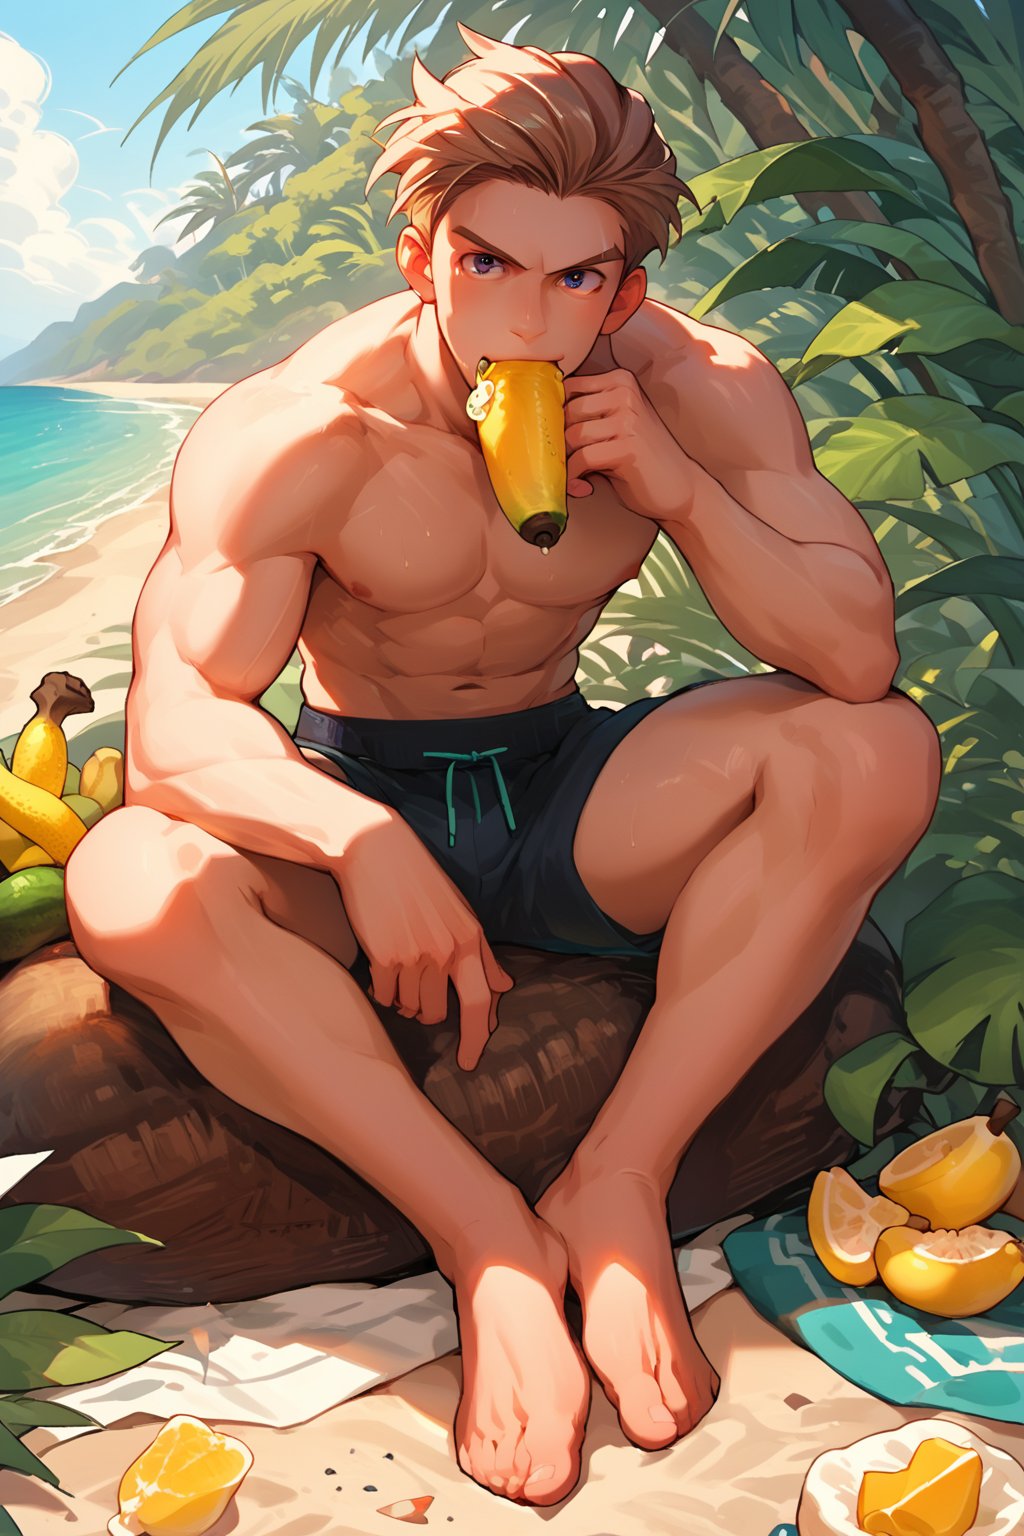 score_9, score_8_up, score_7_up, score_6_up, score_5_up, source_anime, male focus, solo, toned_male, looking_at_viewer, full body, pkmn_swim, Beach, palm_tree, bananas, eating